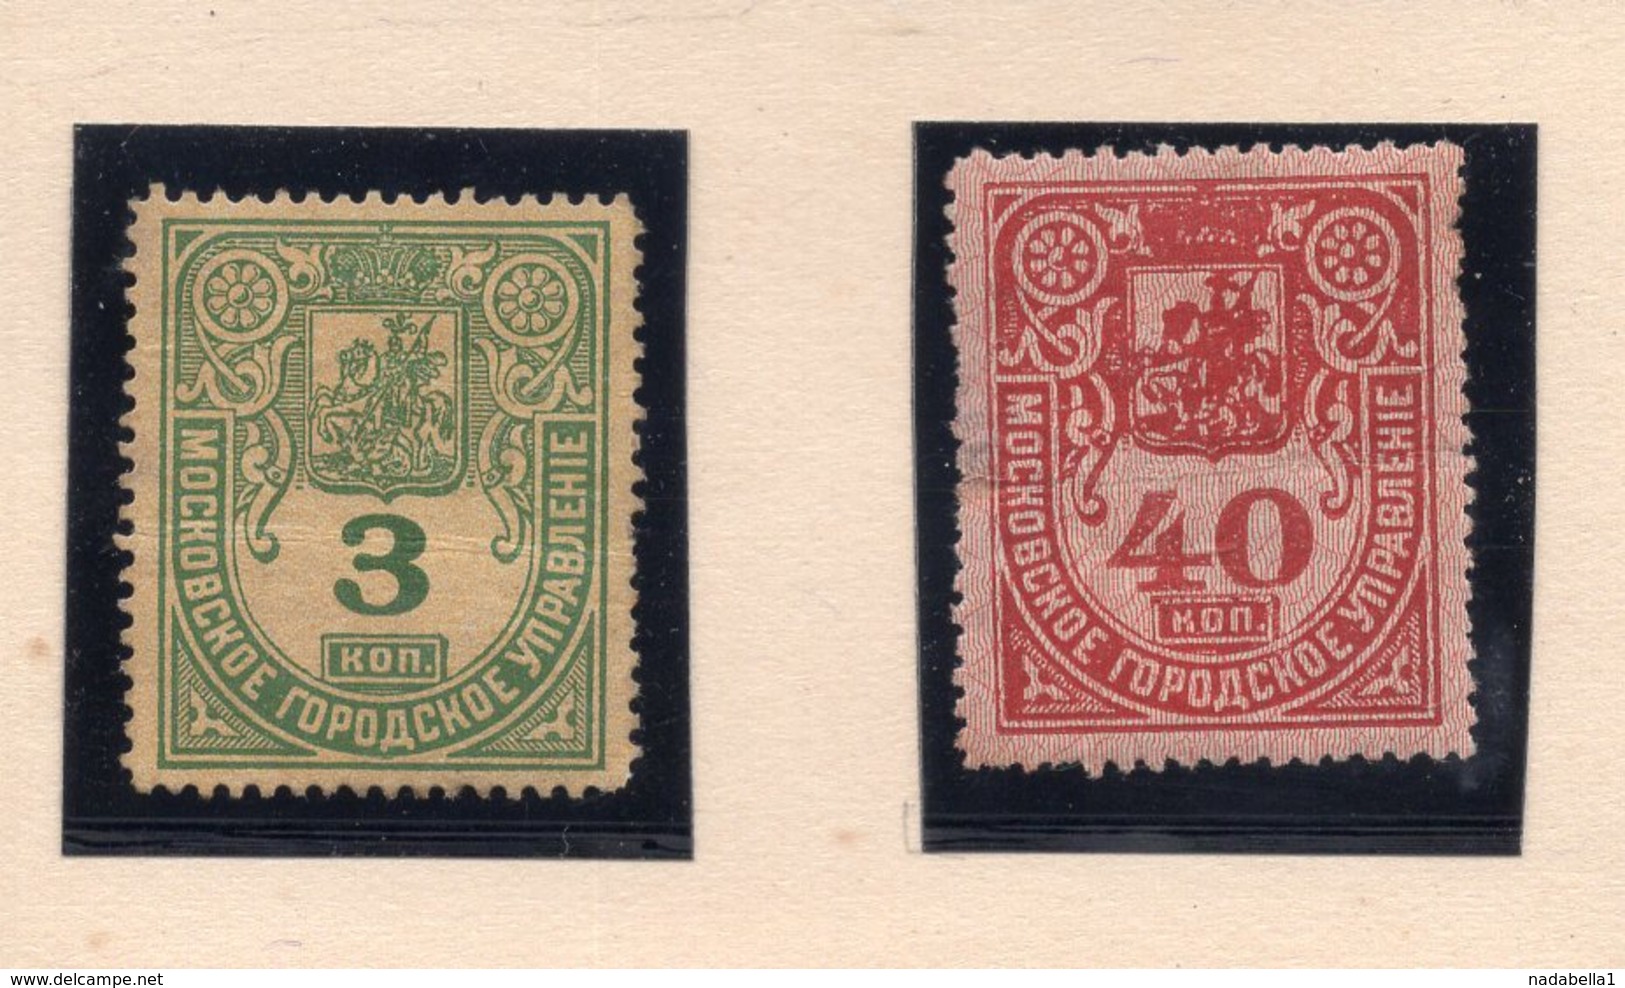 RUSSIA, MOSCOW, MUNICIPAL REVENUE STAMPS, 3 & 40 KOPEIKA, MH - Fiscale Zegels